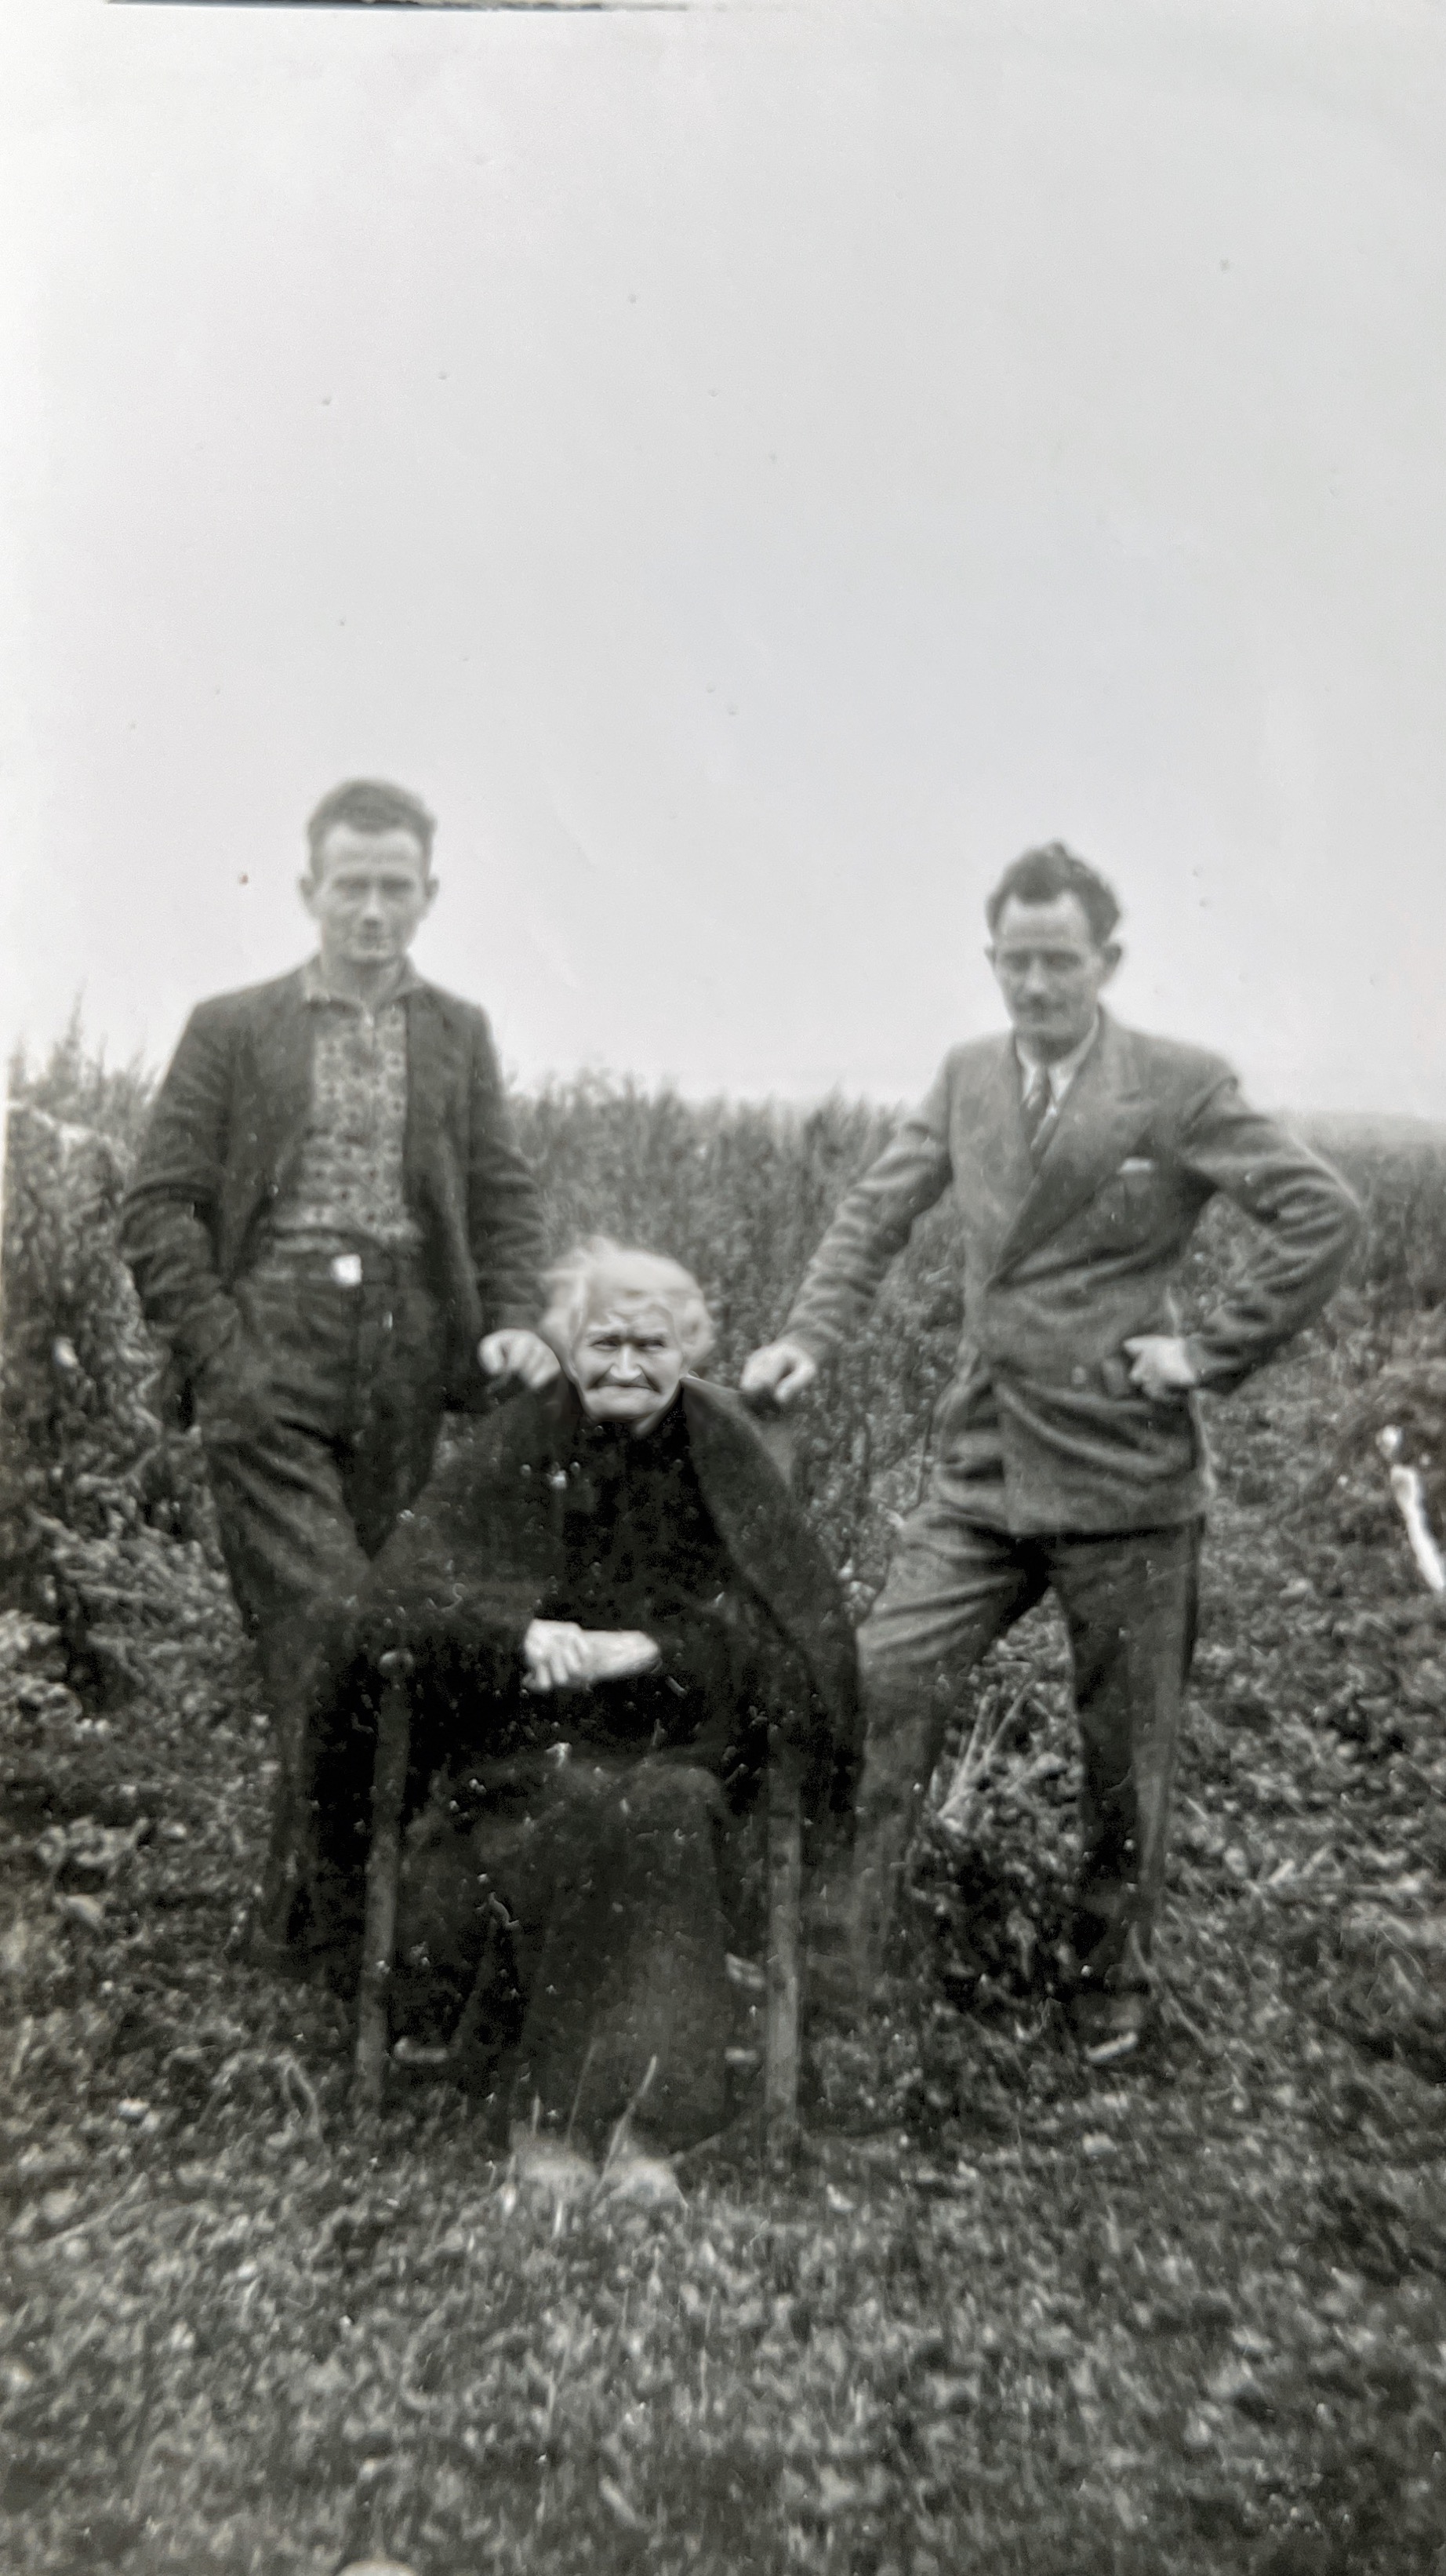 Jack and Joe Marrinan Bidsy Lahiff, age 94 Kilfearagh, 1937 Grand aunt of Jack and Joe Had 21 children. Lived in country  Had been in bed. Came outdoors for photo taken by Mary Campion Marrinan (Joe’s wife)